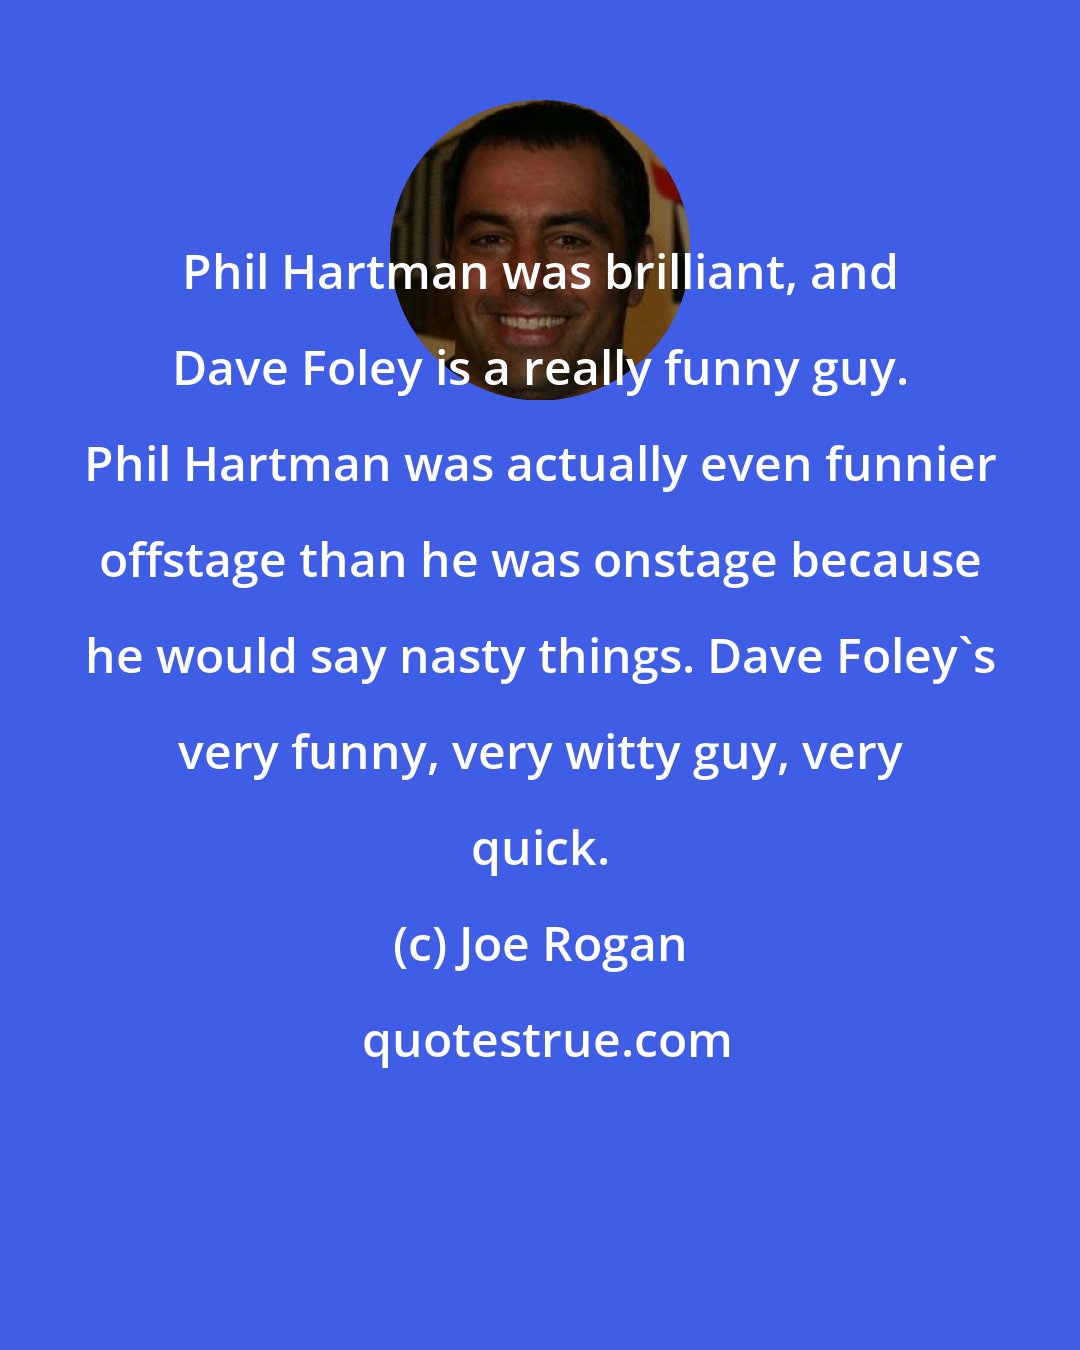 Joe Rogan: Phil Hartman was brilliant, and Dave Foley is a really funny guy. Phil Hartman was actually even funnier offstage than he was onstage because he would say nasty things. Dave Foley's very funny, very witty guy, very quick.